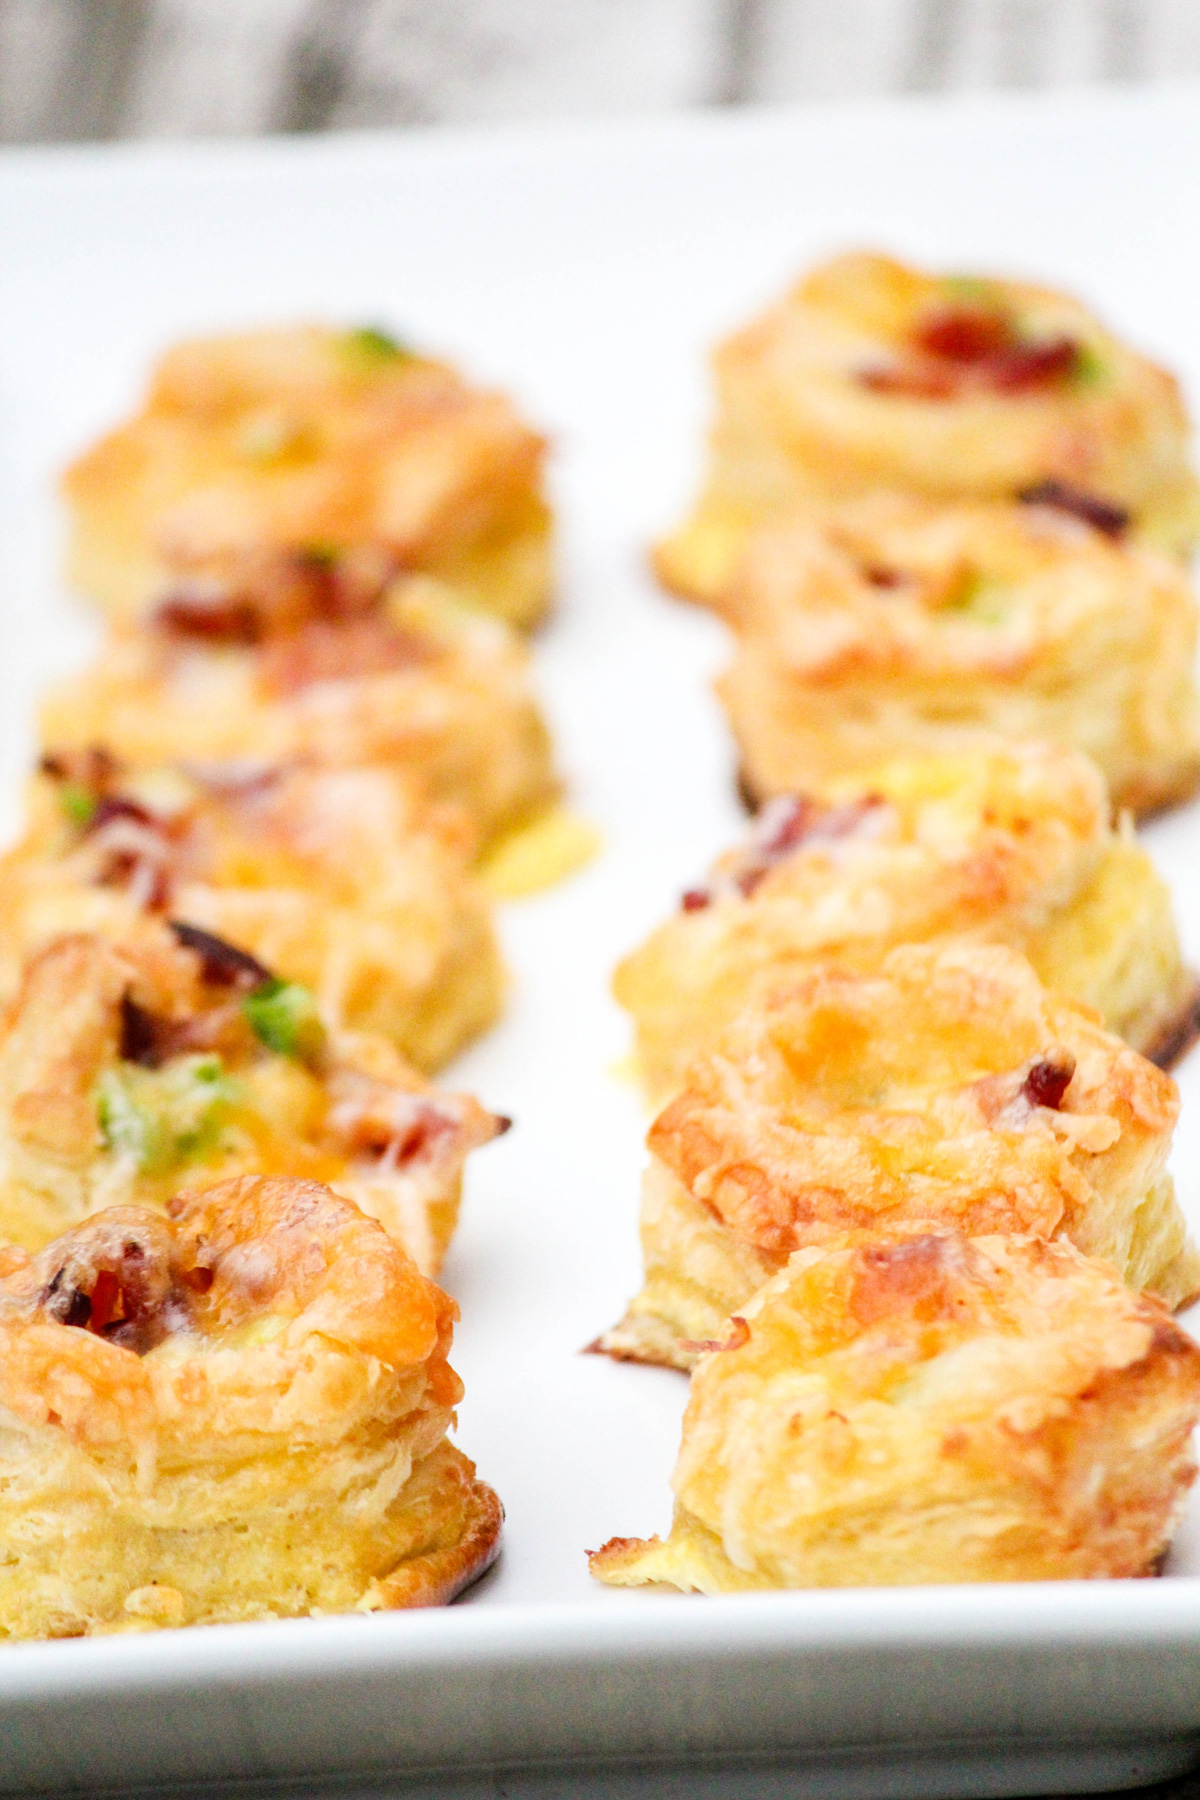 Bacon and Egg Breakfast Pastries